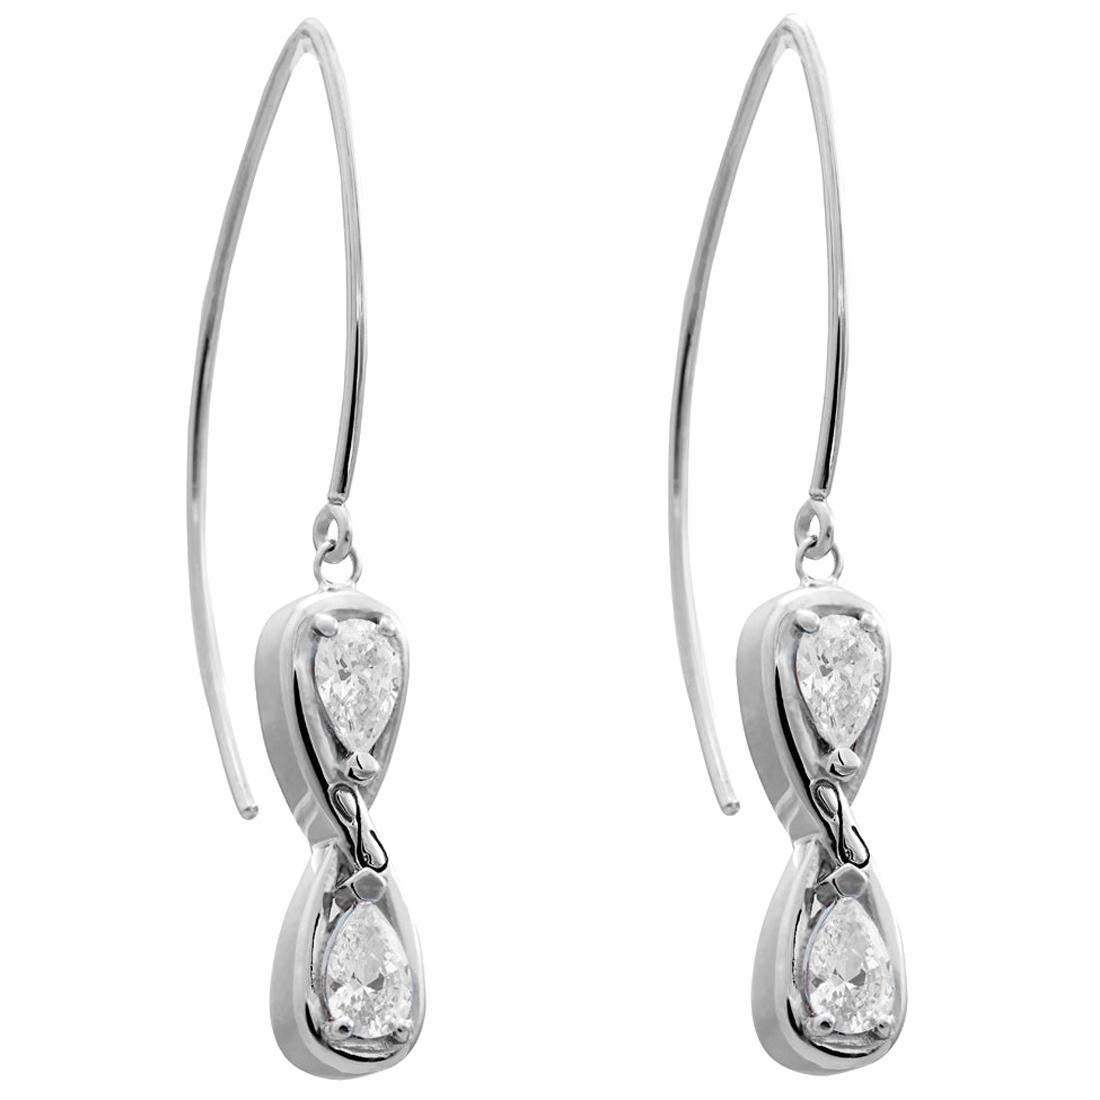 White Topaz Infinity Stone Earwires For Sale